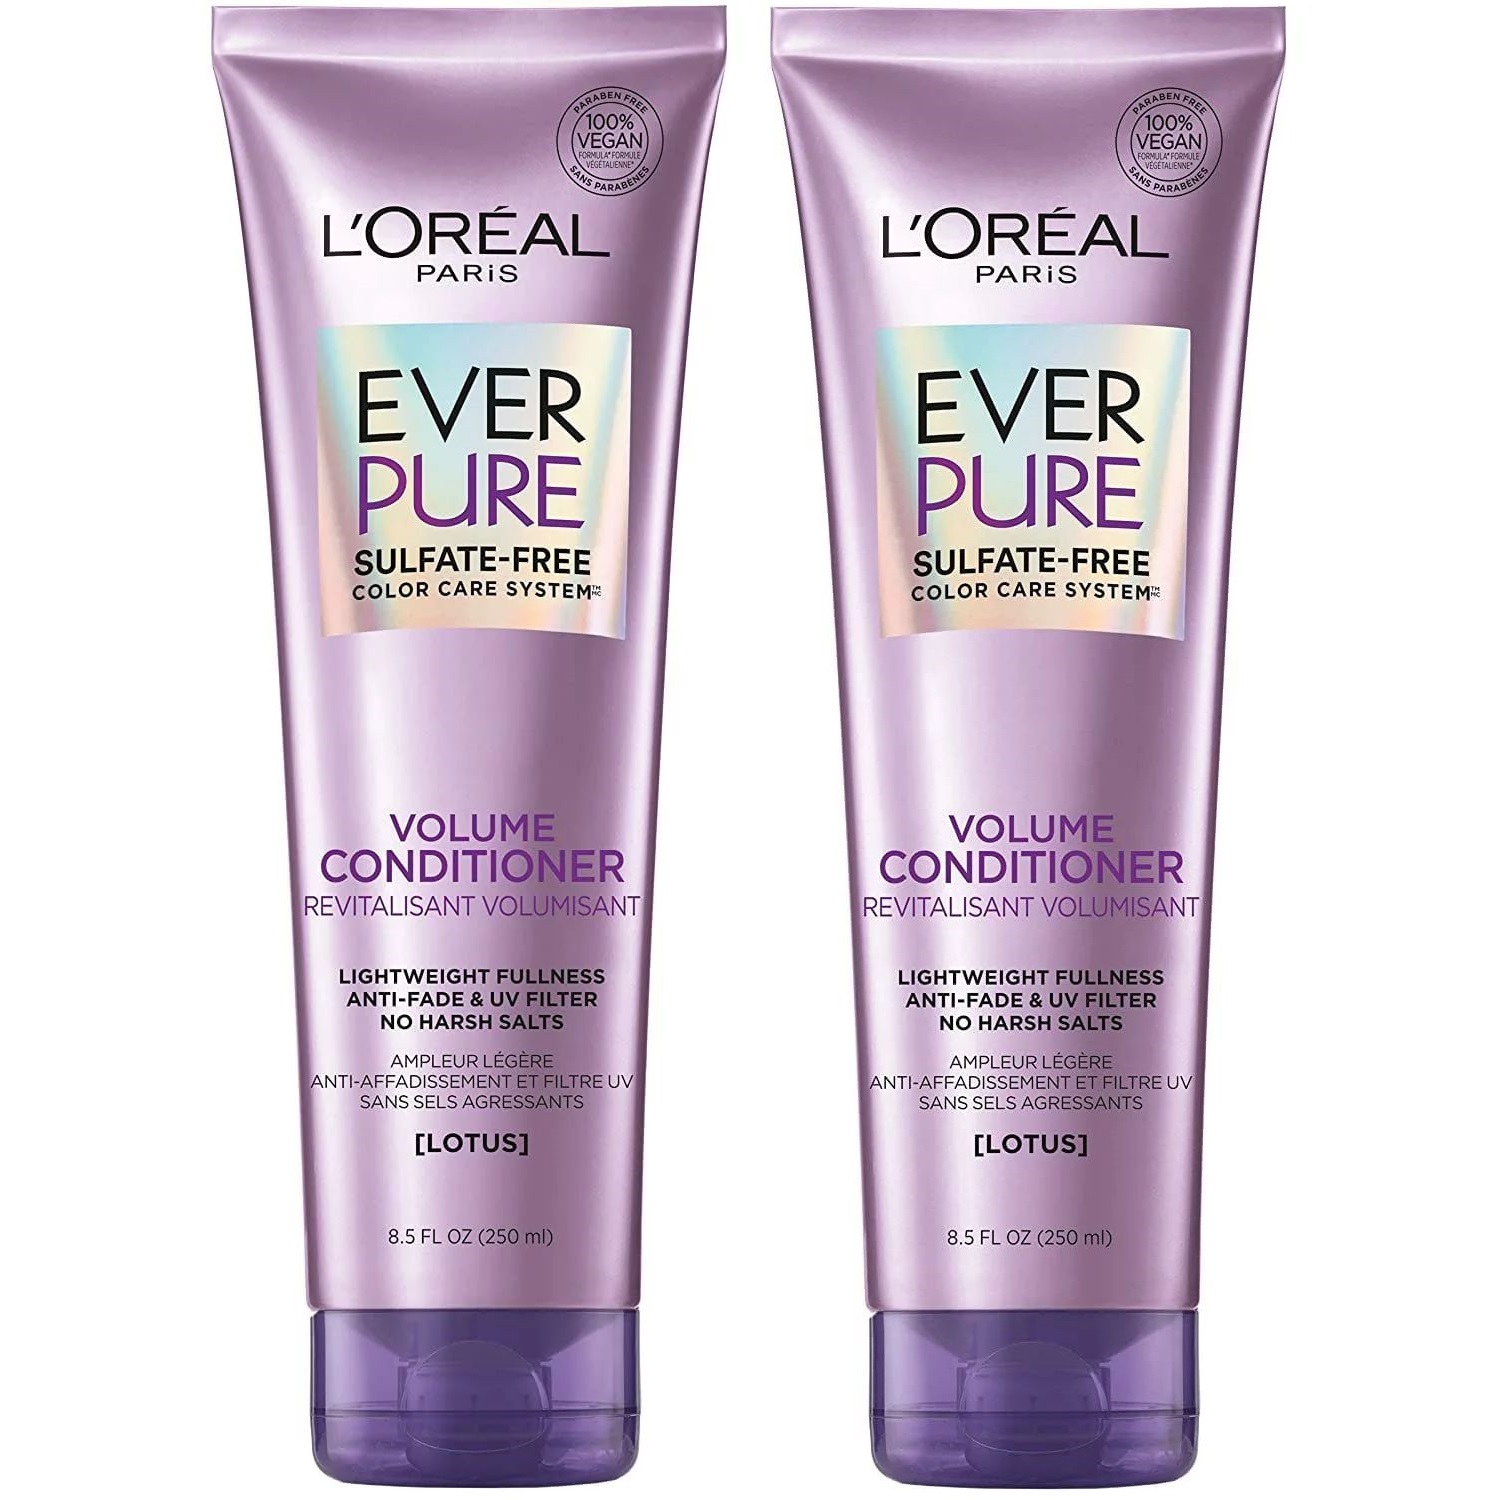 L'Oreal Paris EverPure Sulfate-Free Color Care System Lotus Volume Conditioner 8.5 oz (Pack of 2) - image 1 of 4